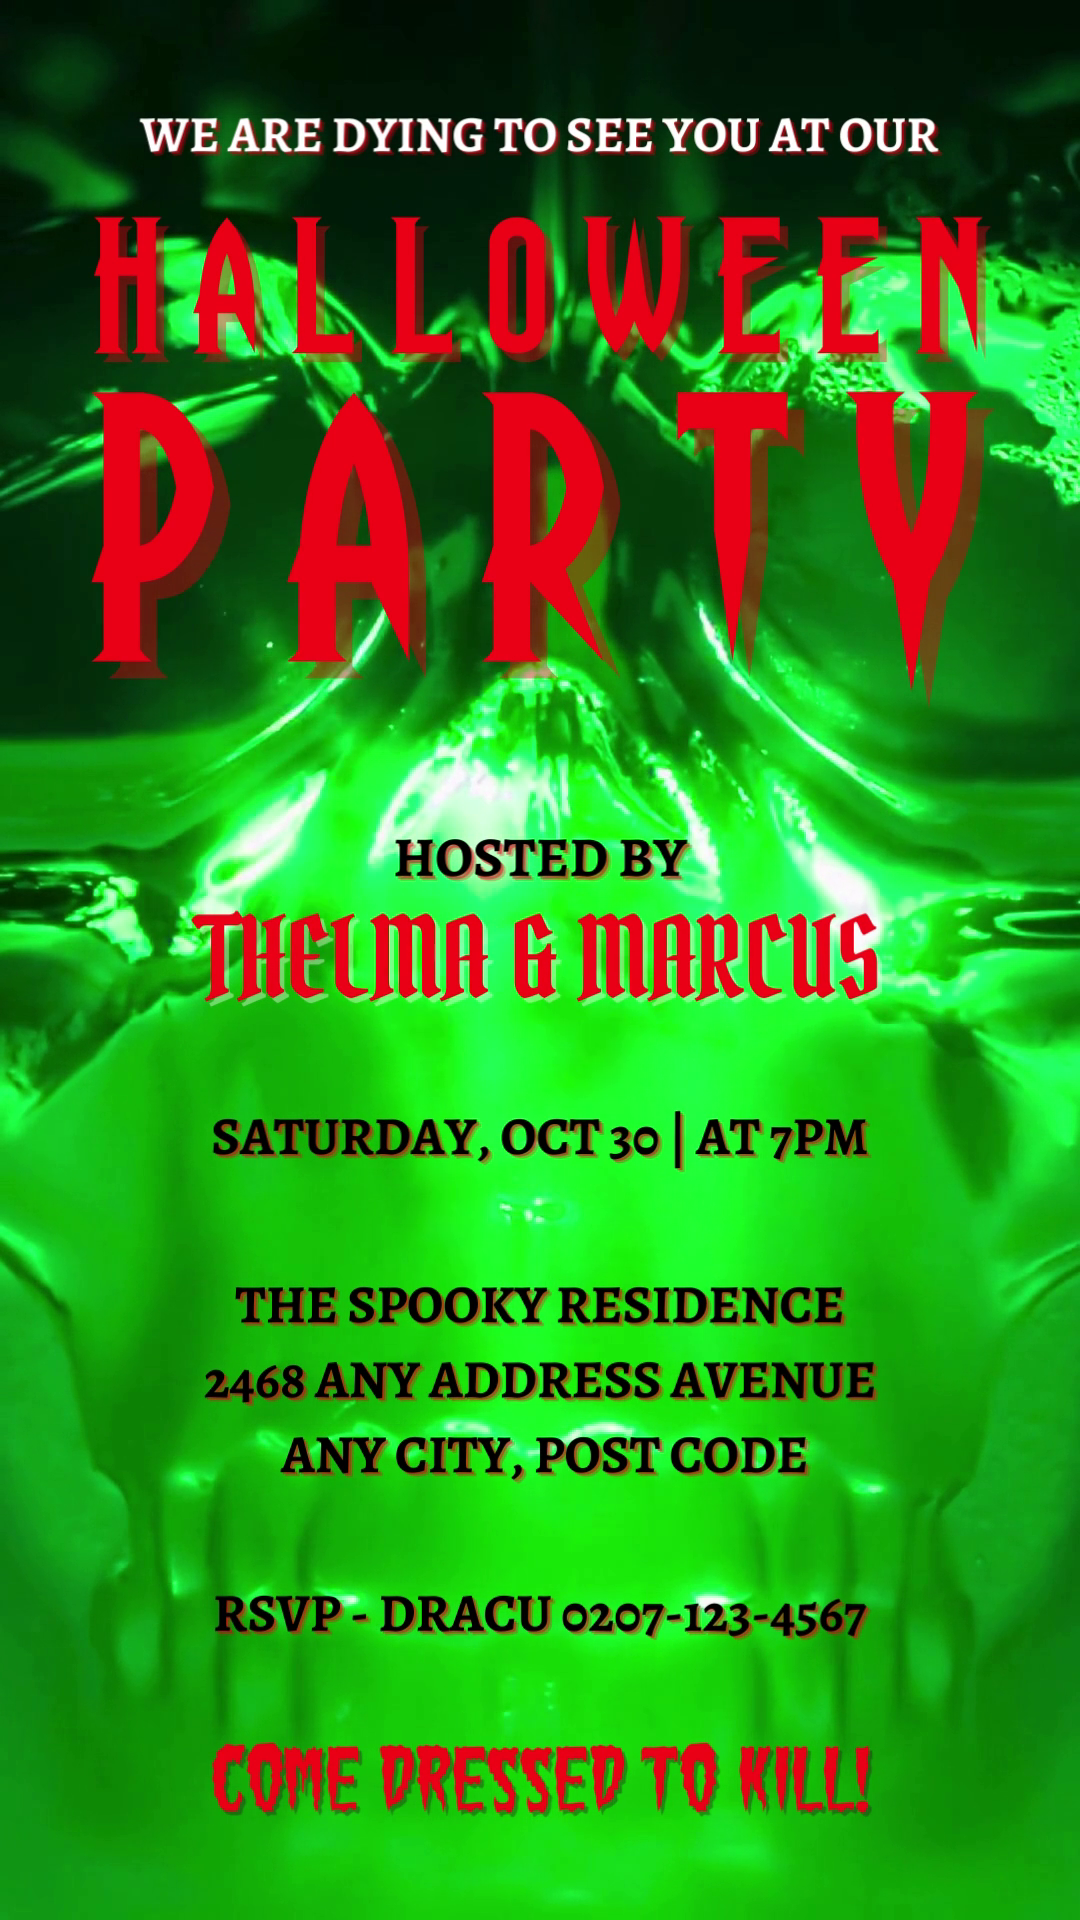 Neon Green Skull Halloween Party Video Invite with editable text, spooky sound effects, and customizable elements via Canva. Ideal for digital sharing through various messaging platforms.